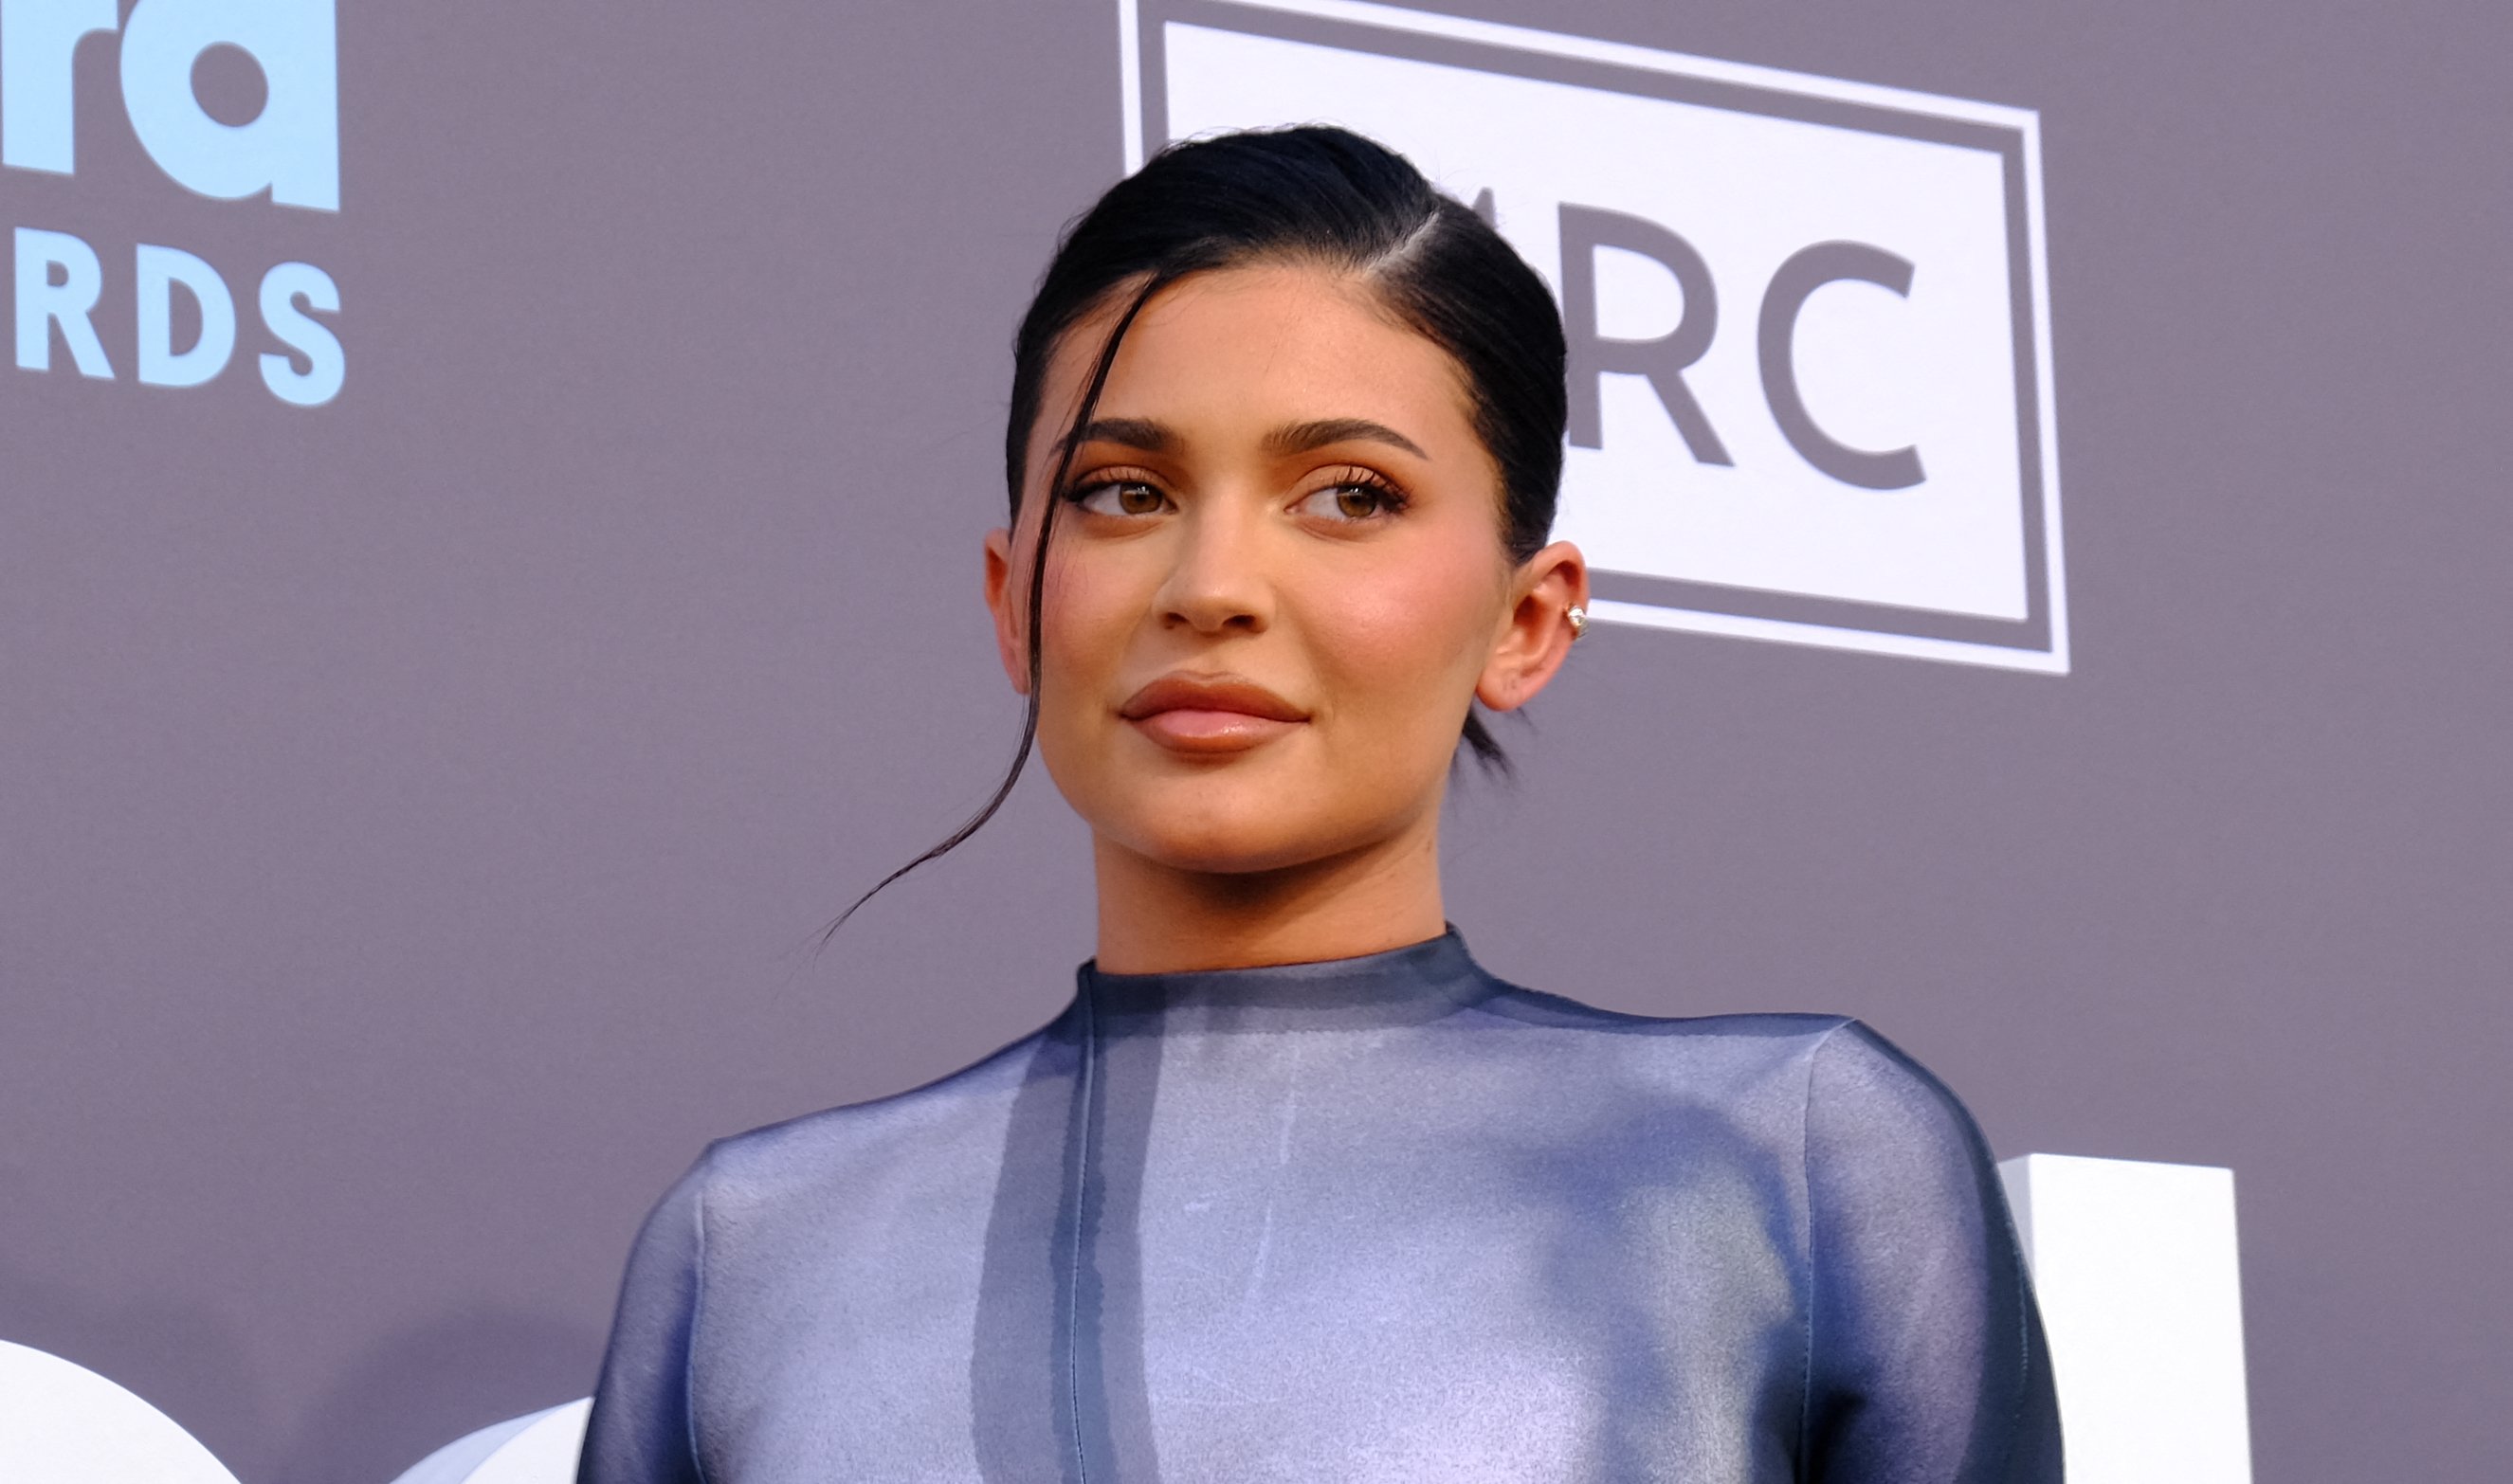 Kylie Jenner at the Billboard Music Awards in Las Vegas, Nevada, on May 15, 2022. | Source: Getty Images